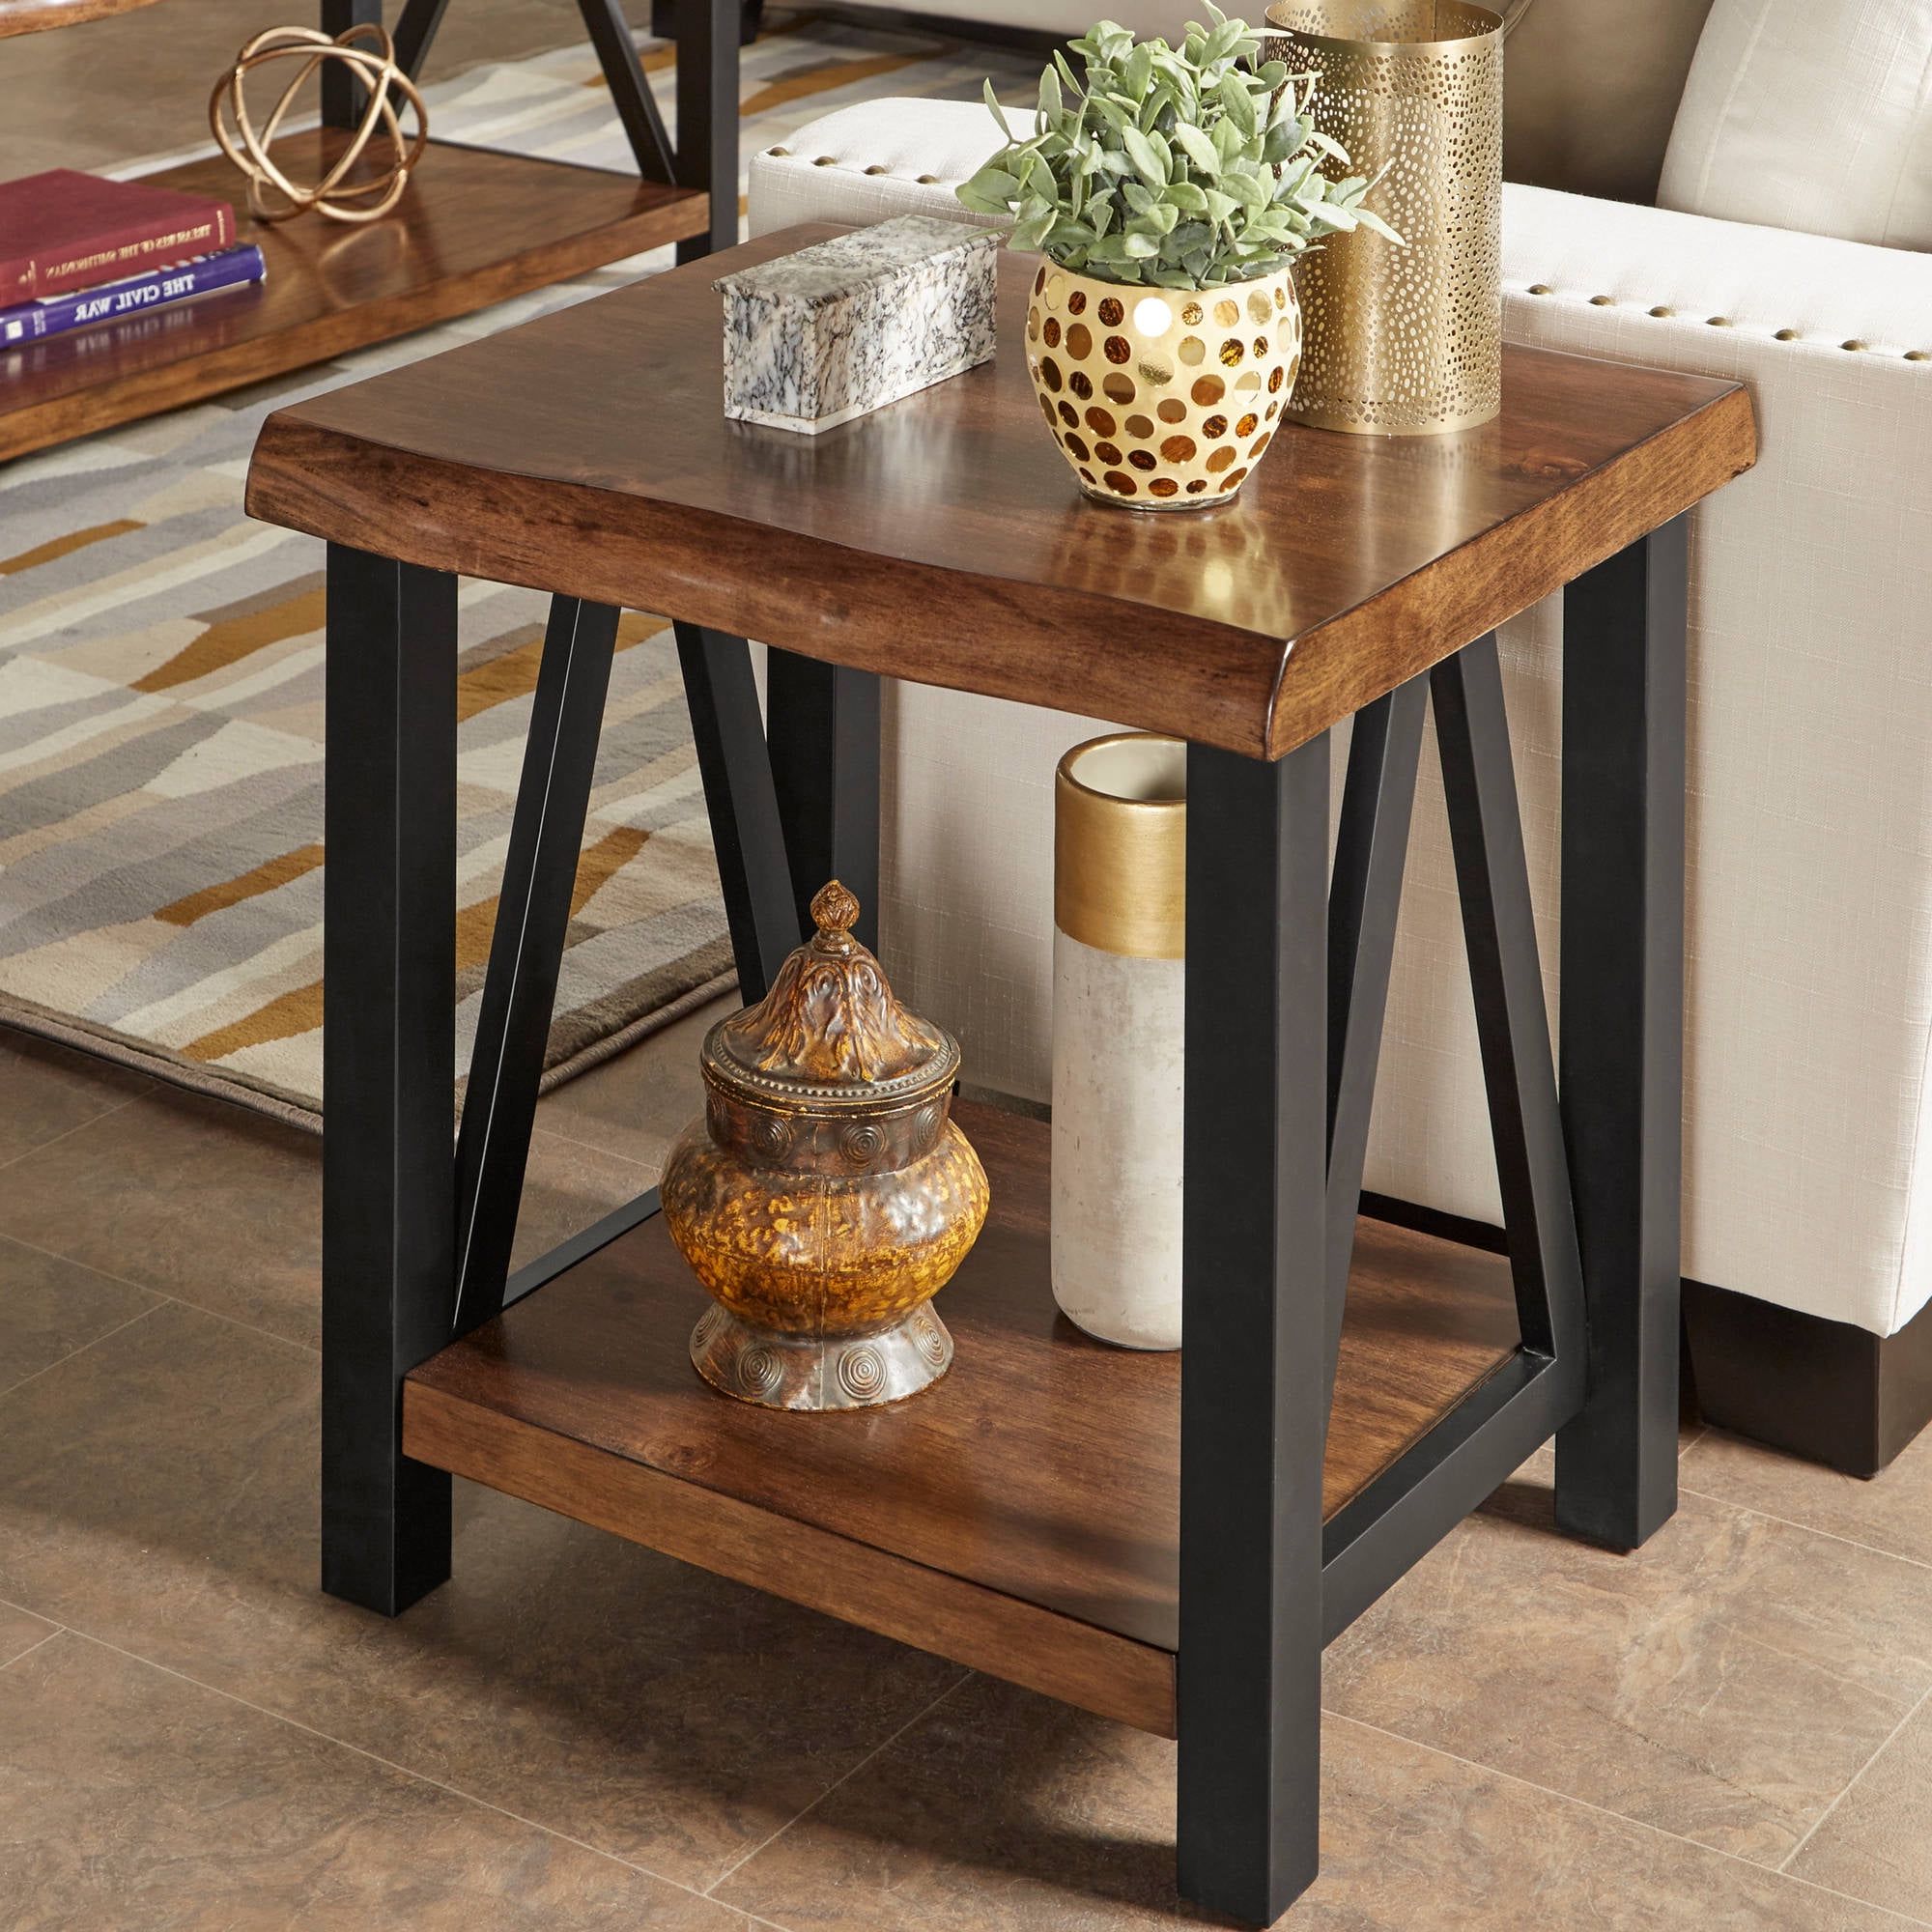 Weston Home Rustic Metal Base End Table With Natural Edge Table Top And Inside Metal Side Tables For Living Spaces (Gallery 6 of 20)